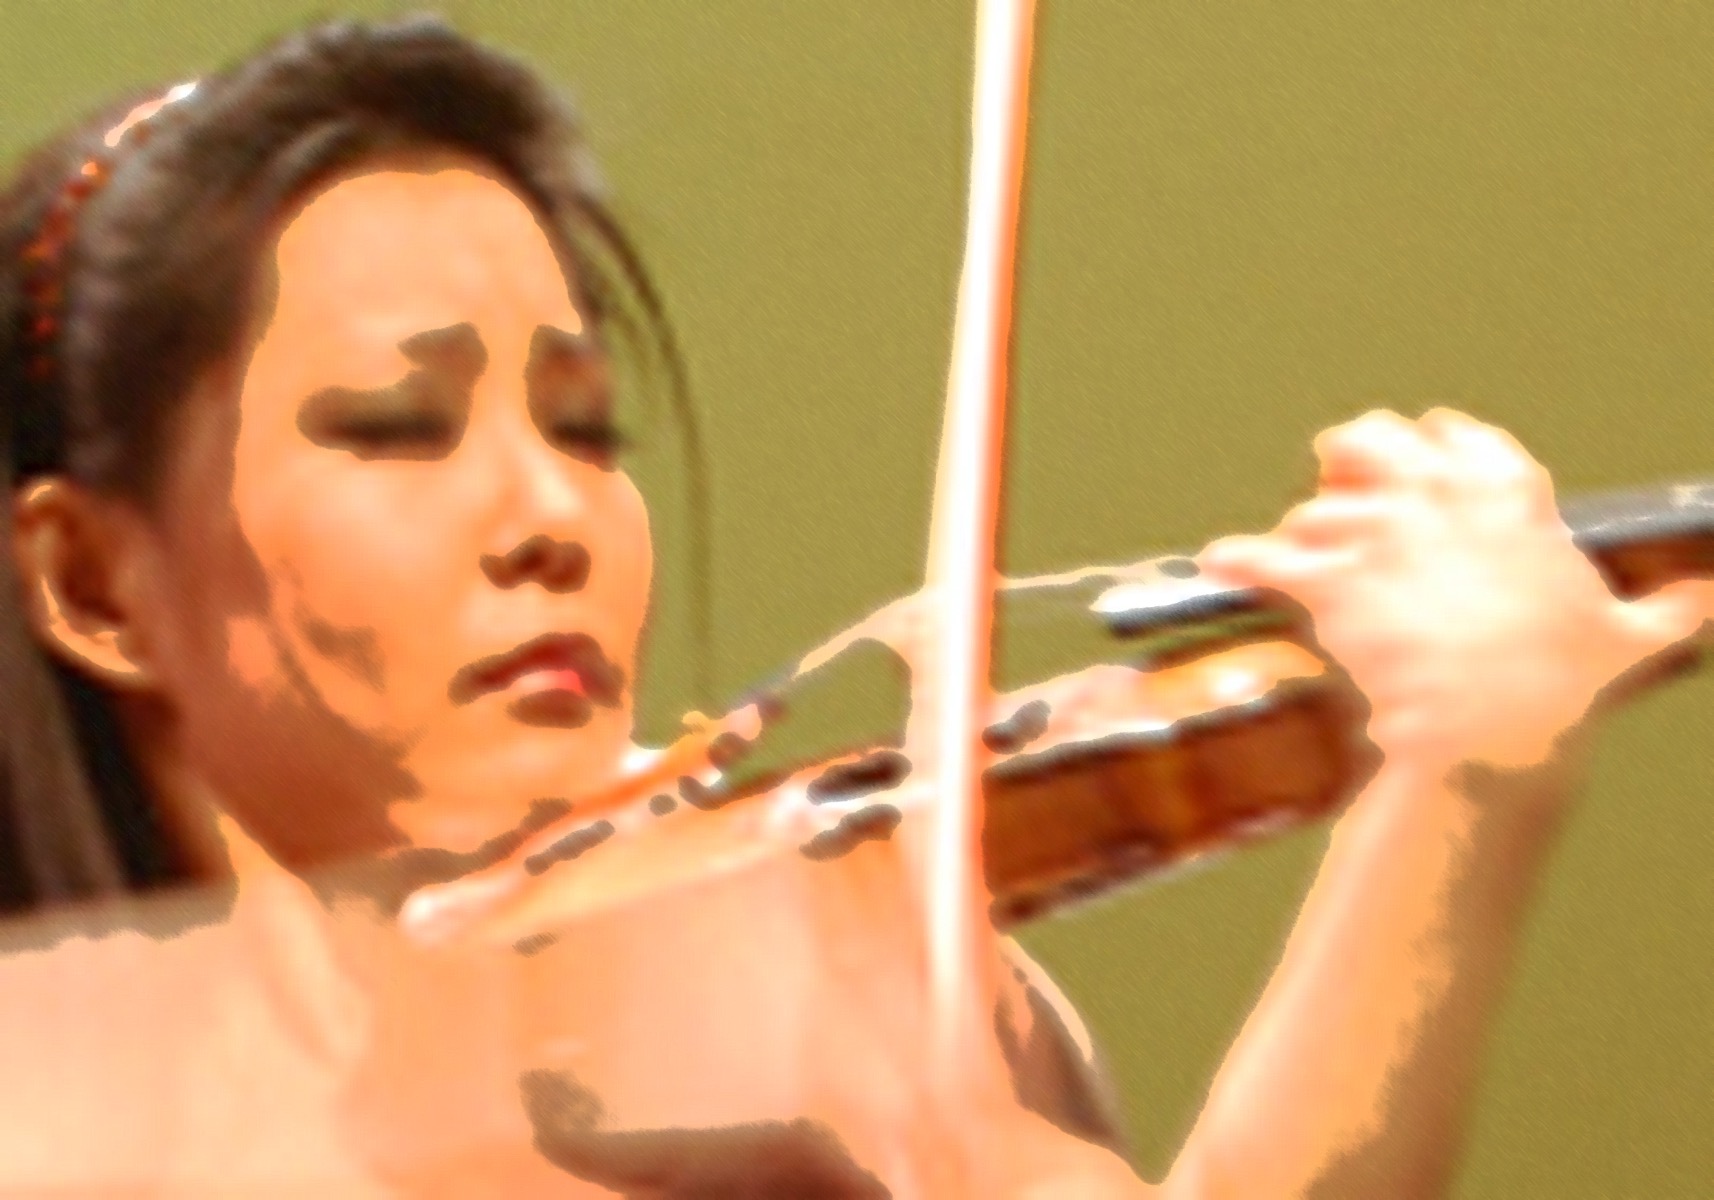 Artwork showing Susanne's face as she plays